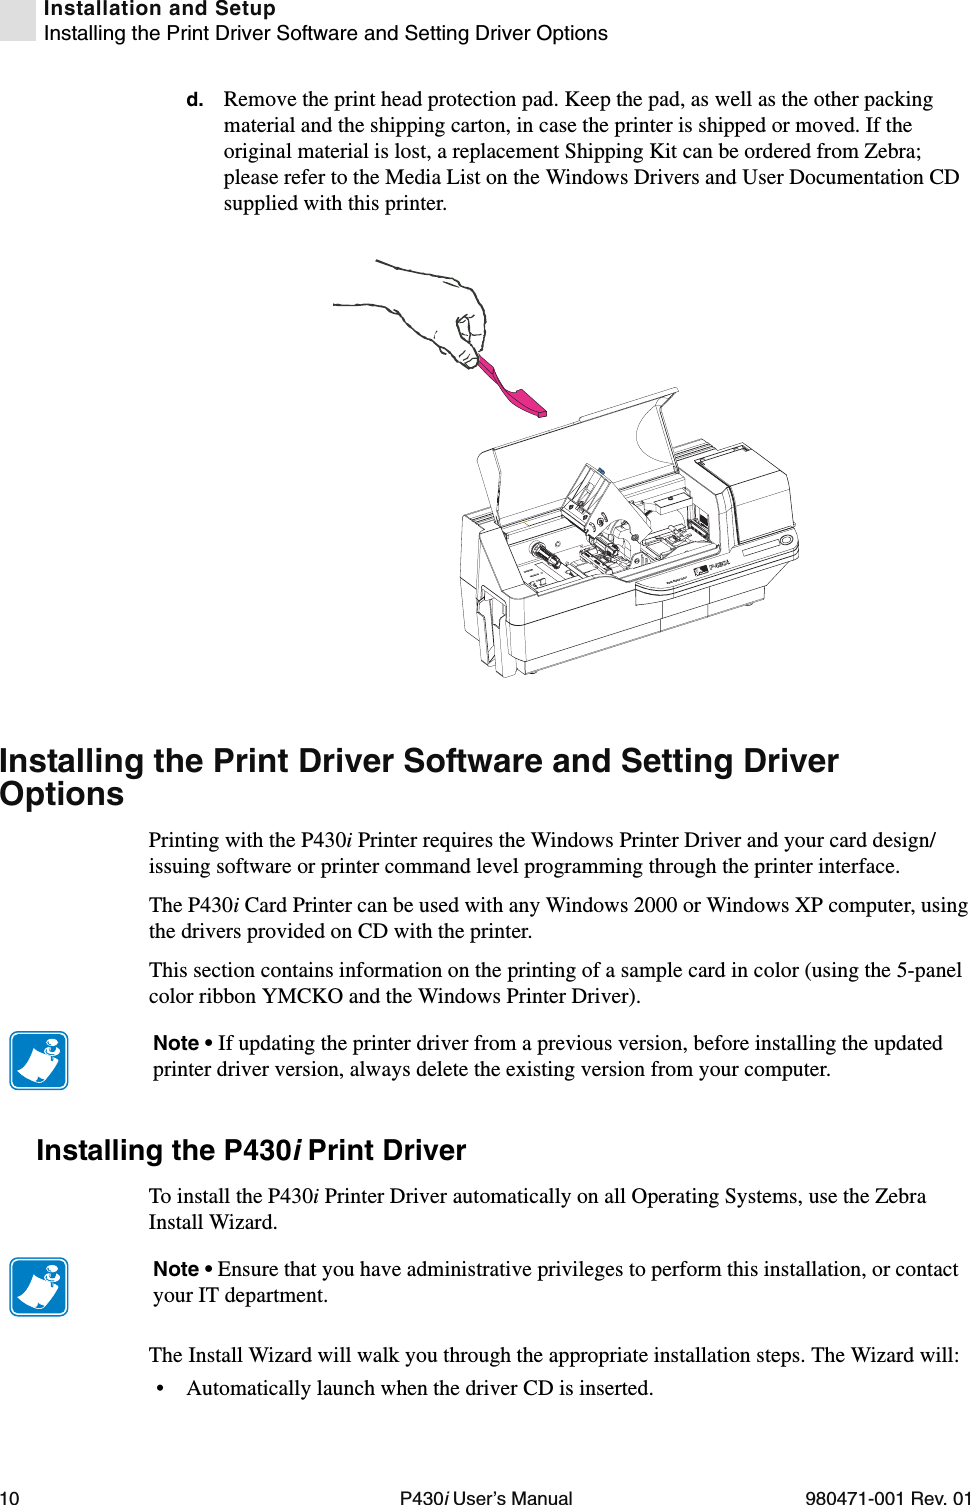 10 P430i User’s Manual 980471-001 Rev. 01Installation and SetupInstalling the Print Driver Software and Setting Driver Optionsd. Remove the print head protection pad. Keep the pad, as well as the other packing material and the shipping carton, in case the printer is shipped or moved. If the original material is lost, a replacement Shipping Kit can be ordered from Zebra; please refer to the Media List on the Windows Drivers and User Documentation CD supplied with this printer.Installing the Print Driver Software and Setting Driver OptionsPrinting with the P430i Printer requires the Windows Printer Driver and your card design/issuing software or printer command level programming through the printer interface.The P430i Card Printer can be used with any Windows 2000 or Windows XP computer, using the drivers provided on CD with the printer.This section contains information on the printing of a sample card in color (using the 5-panel color ribbon YMCKO and the Windows Printer Driver).Installing the P430i Print Driver To install the P430i Printer Driver automatically on all Operating Systems, use the Zebra Install Wizard.The Install Wizard will walk you through the appropriate installation steps. The Wizard will:• Automatically launch when the driver CD is inserted. Dual-Sided ColorNote • If updating the printer driver from a previous version, before installing the updated printer driver version, always delete the existing version from your computer.Note • Ensure that you have administrative privileges to perform this installation, or contact your IT department.